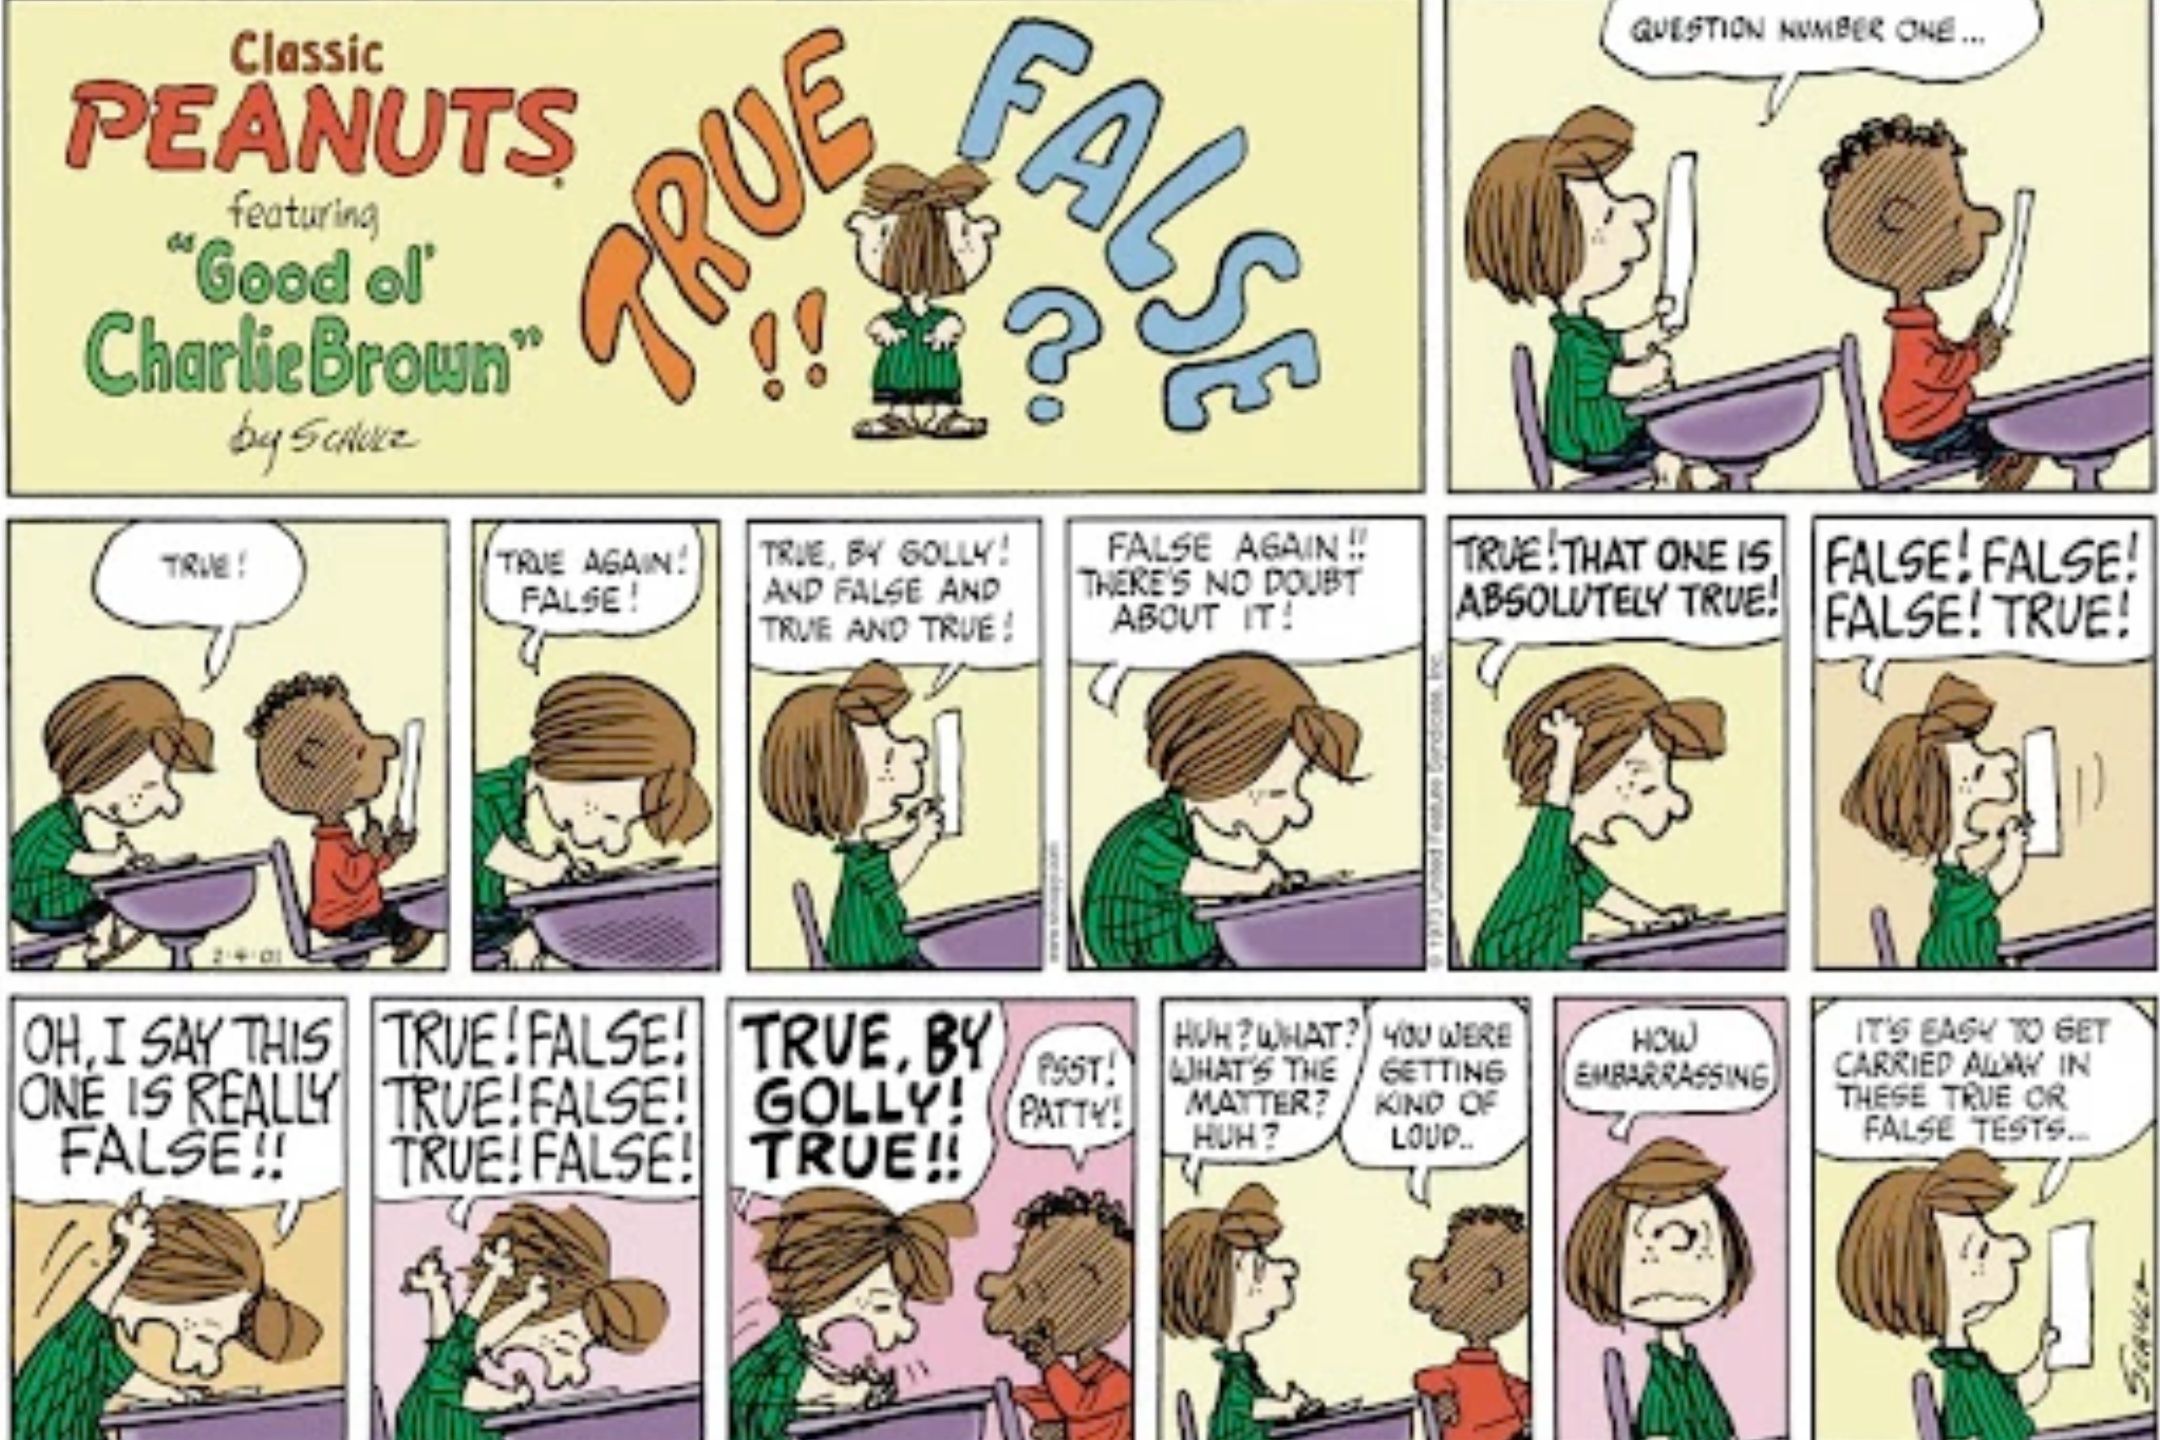 Peppermint Patty and Franklin taking a test in Peanuts.